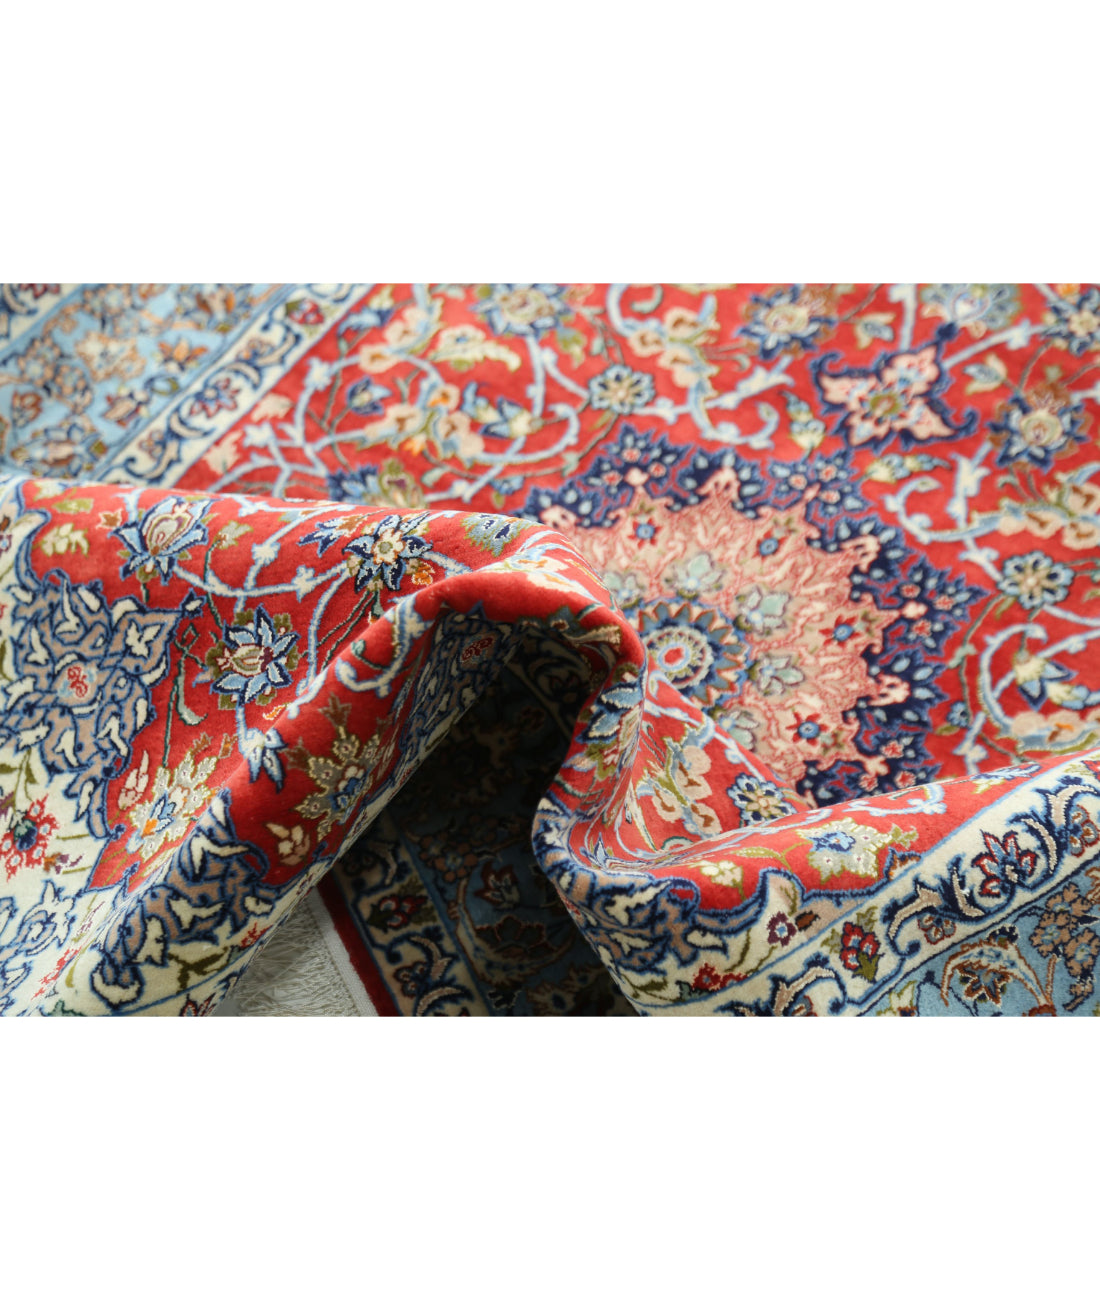 Hand Knotted Masterpiece Persian Isfahan Wool & Silk Rug - 3'6'' x 5'5'' 3'6'' x 5'5'' (105 X 163) / Red / Blue